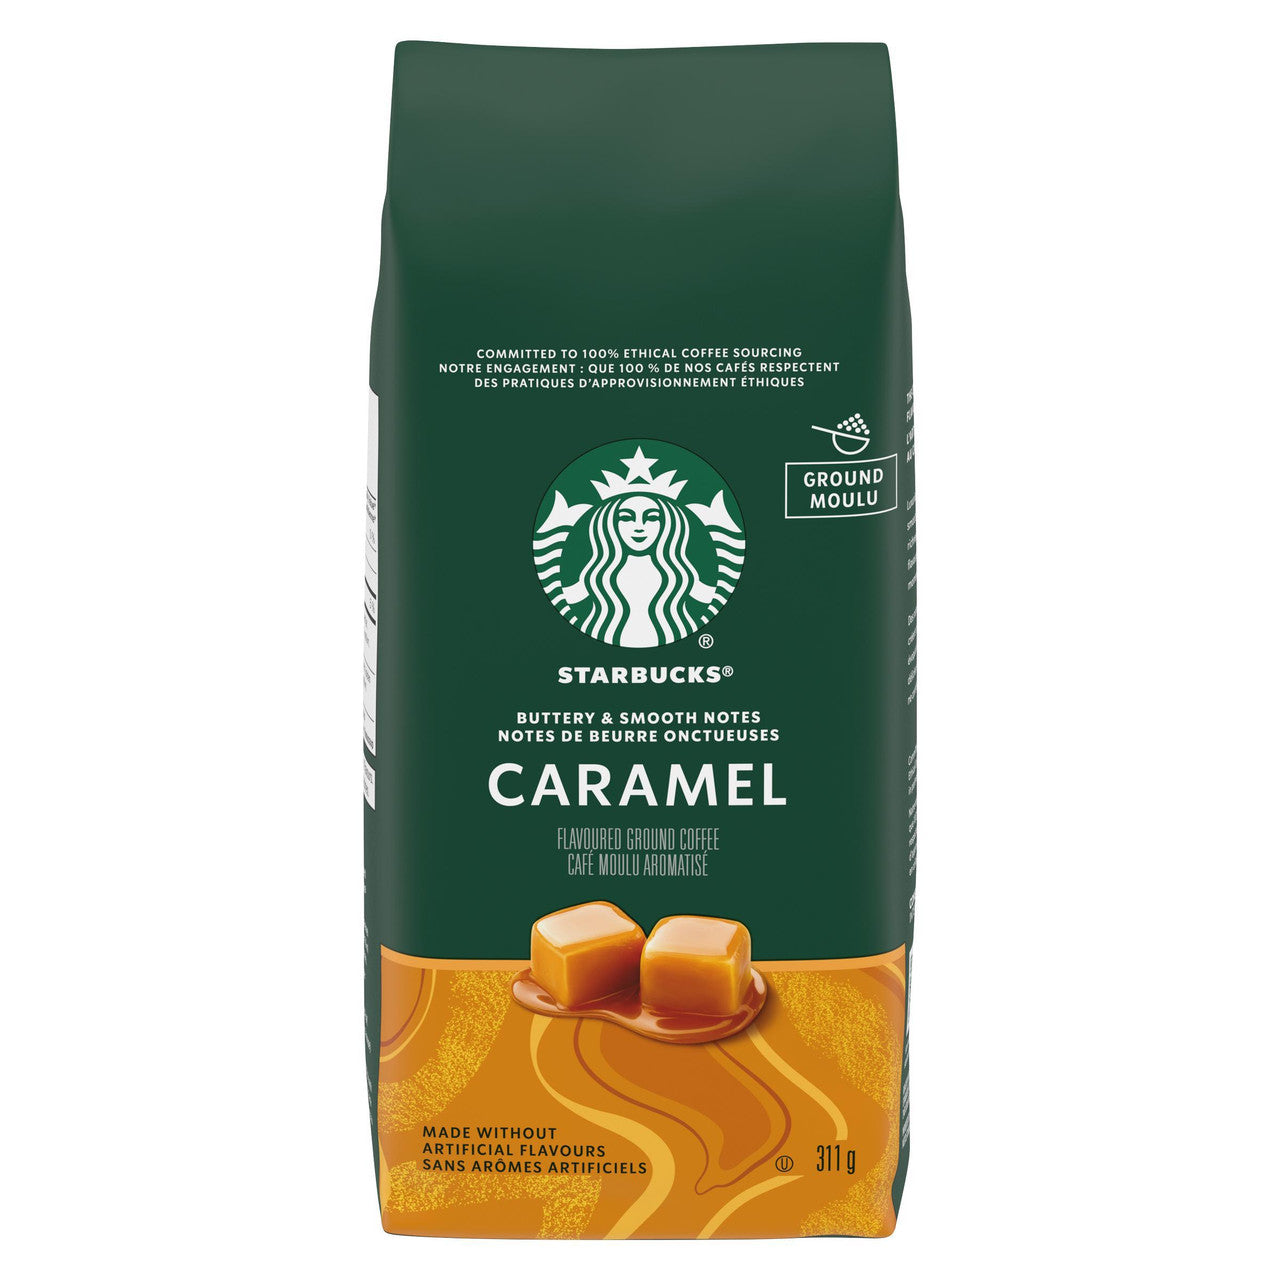 Starbucks Caramel Flavored Ground Coffee, Medium Roasted, 311g/11 oz. Bag {Imported from Canada}